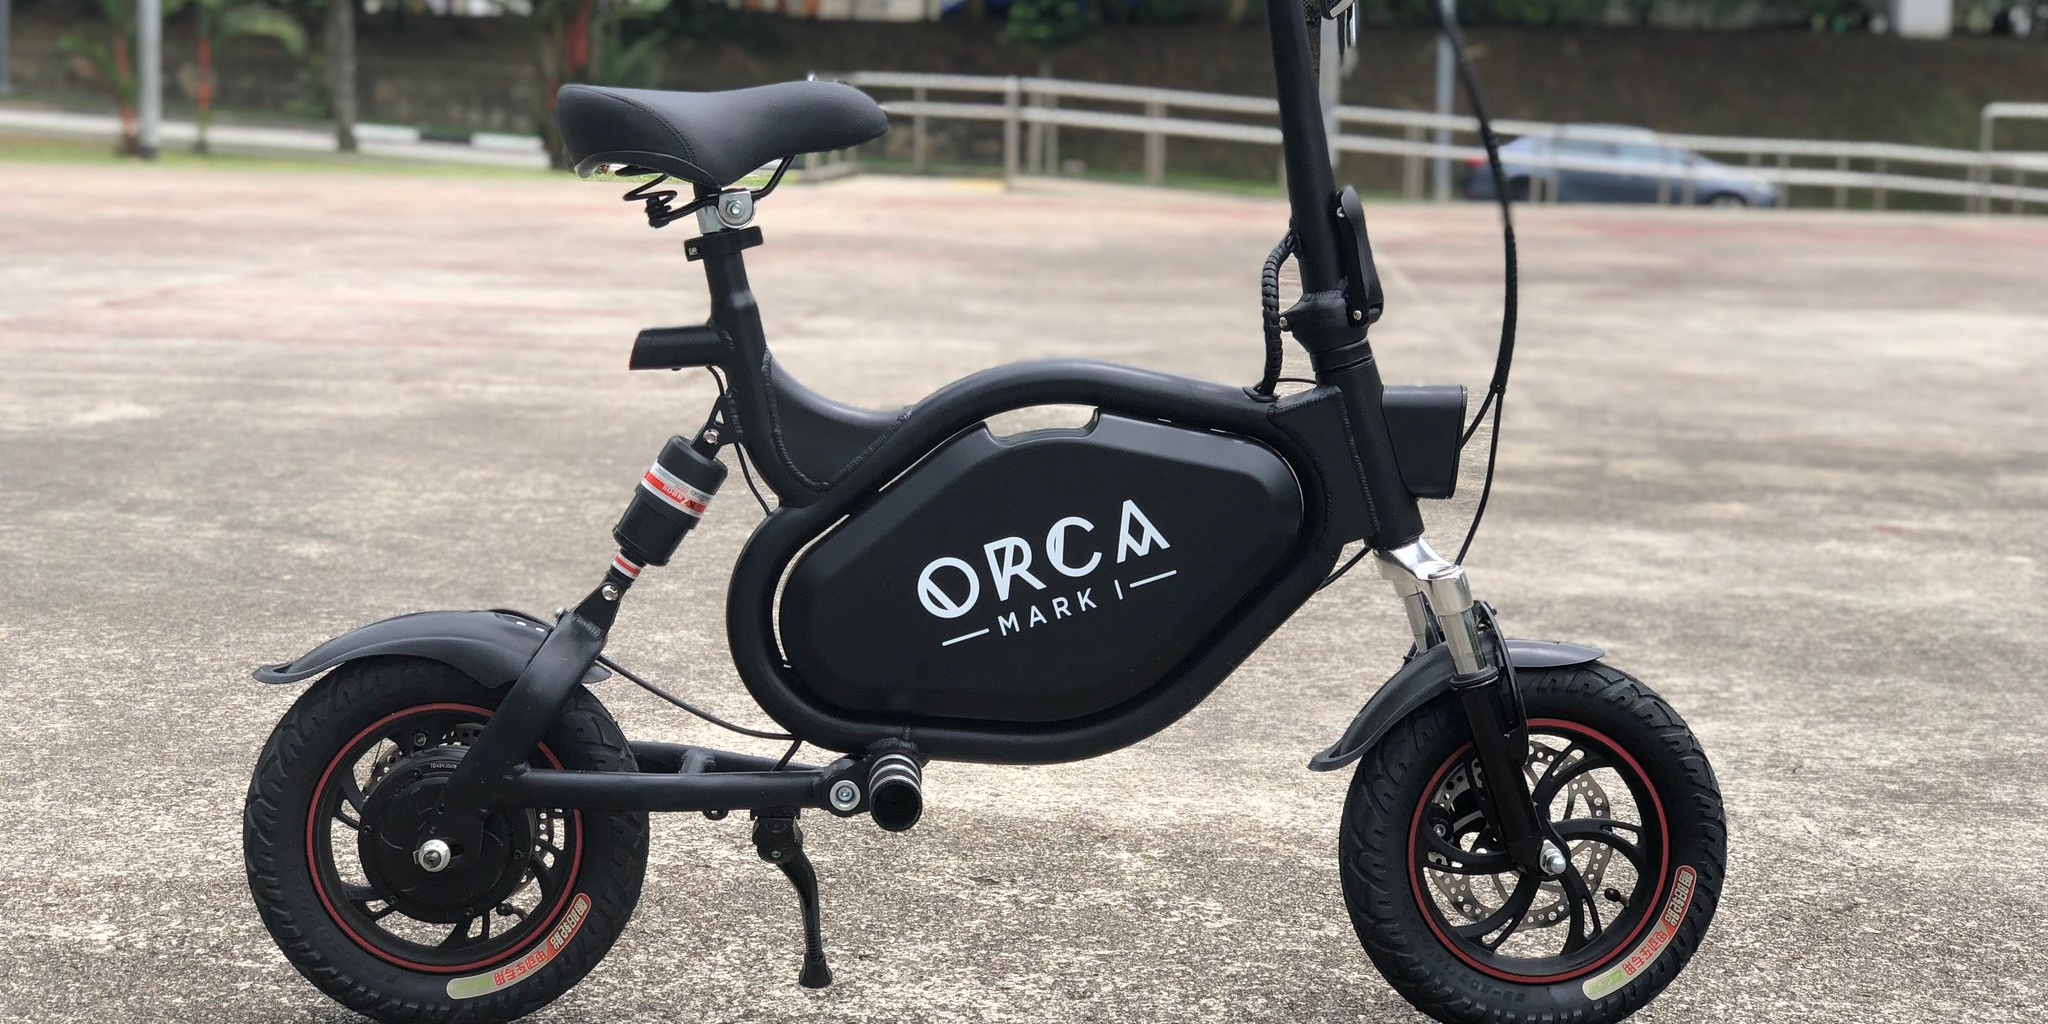 electric scooter best 2018